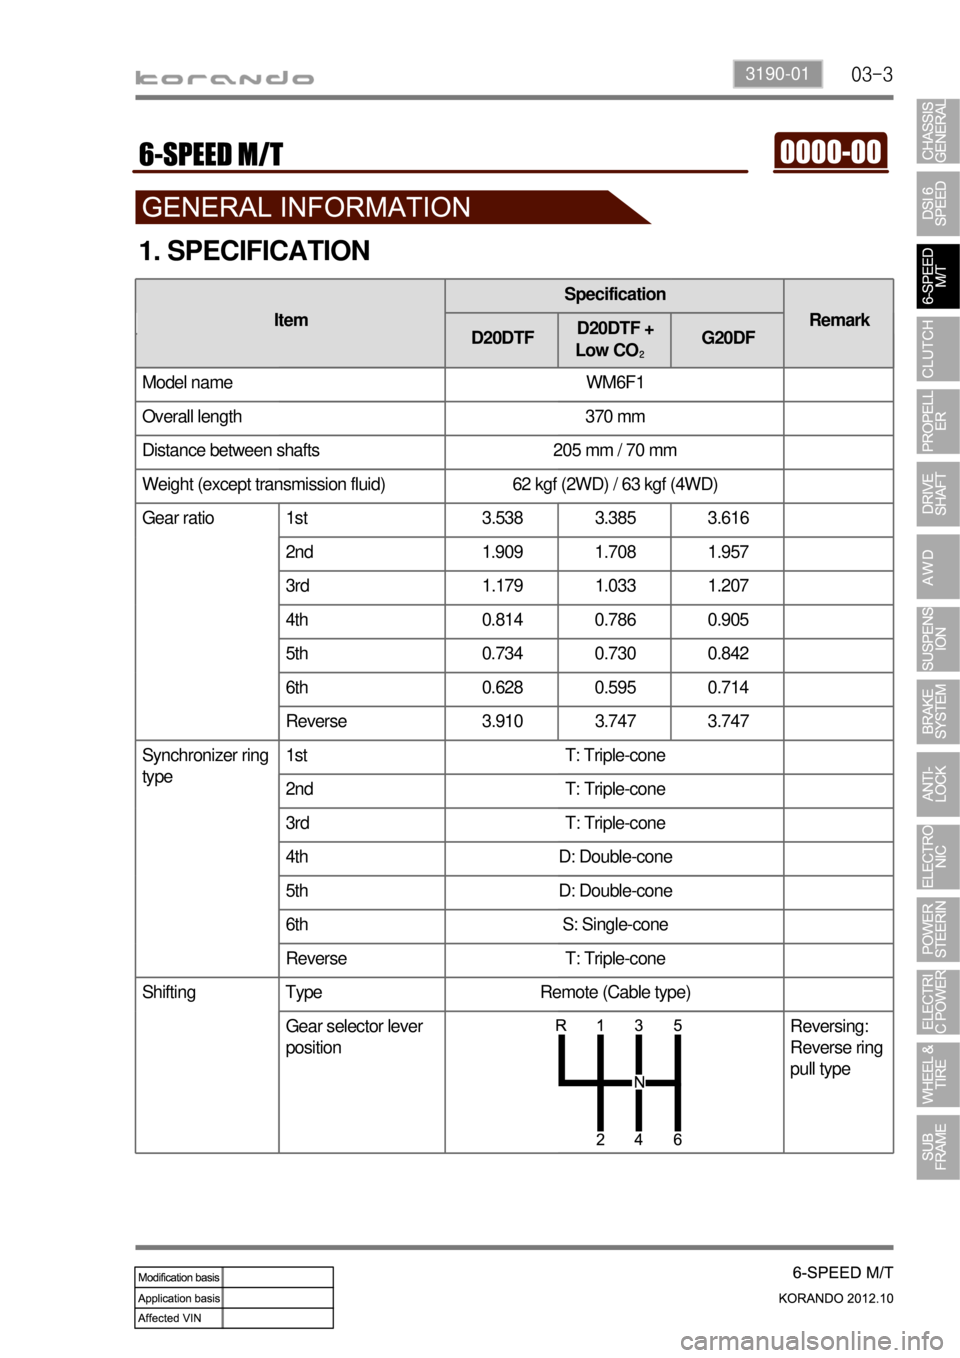 SSANGYONG KORANDO 2012  Service Manual 03-33190-01
1. SPECIFICATION
DG20DD
Model name WM6F1
Overall length 370 mm
Distance between shafts 205 mm / 70 mm
Weight (except transmission fluid) 62 kgf (2WD) / 63 kgf (4WD)
Gear ratio 1st 3.538 3.